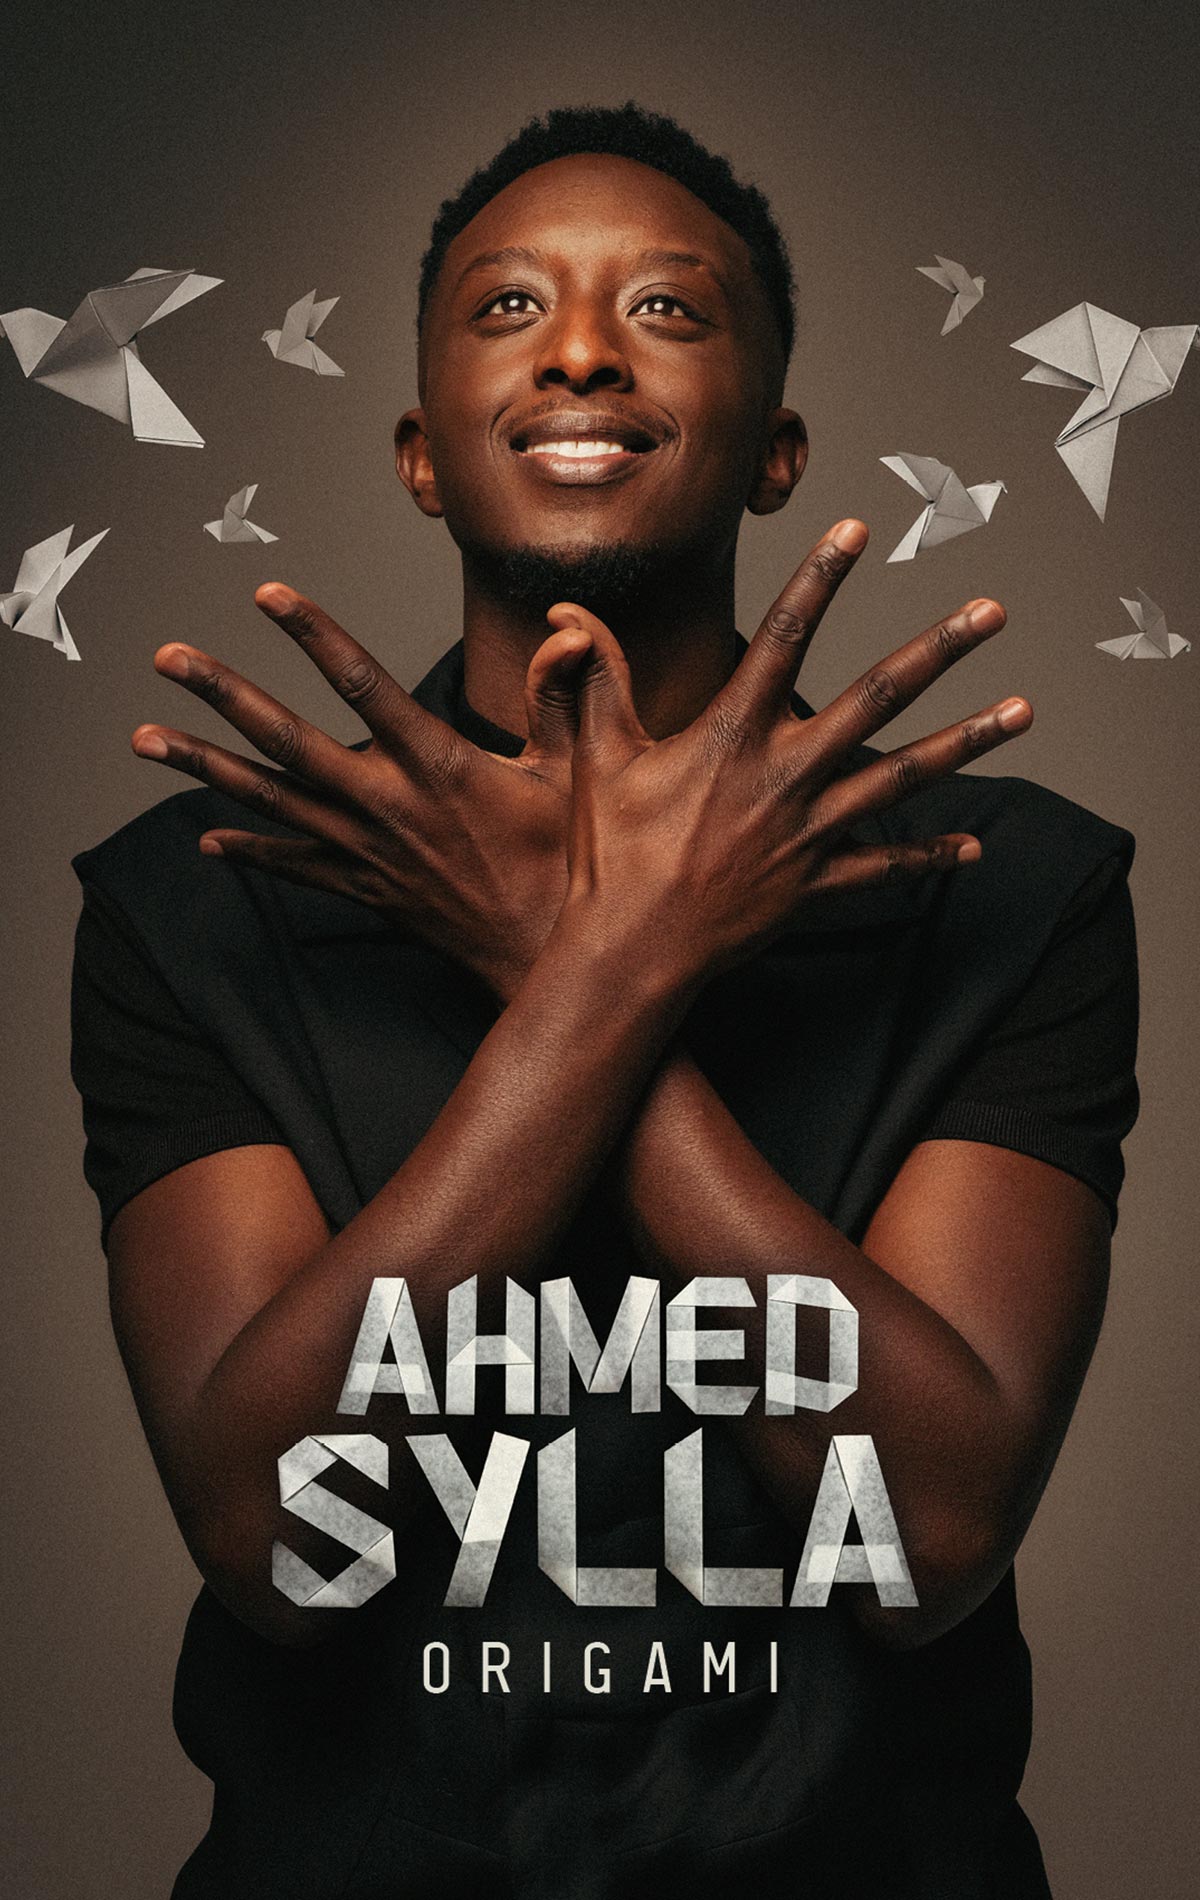 Ahmed Sylla in der Vendespace Tickets